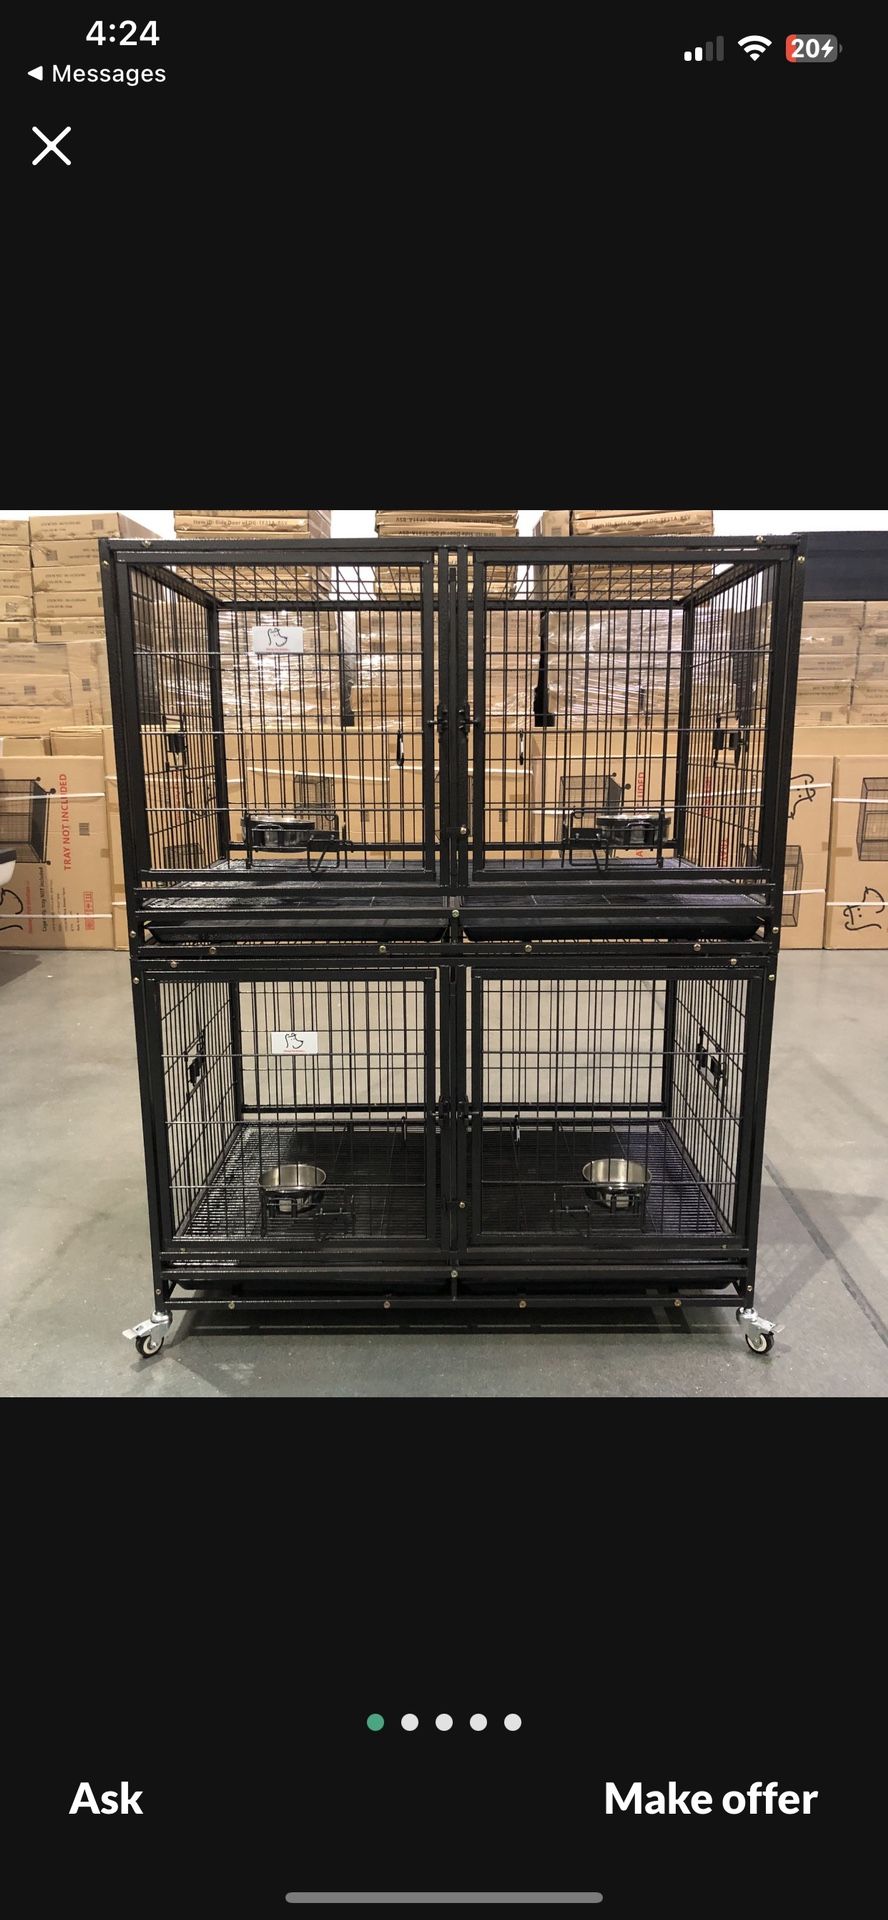 2-TIER Brandnew HD Divider Kennel Crate Cage W/ Tray & Casters & Bowls  🐶🐶 Dimensions:43”L X 28”W X 26”H ✅